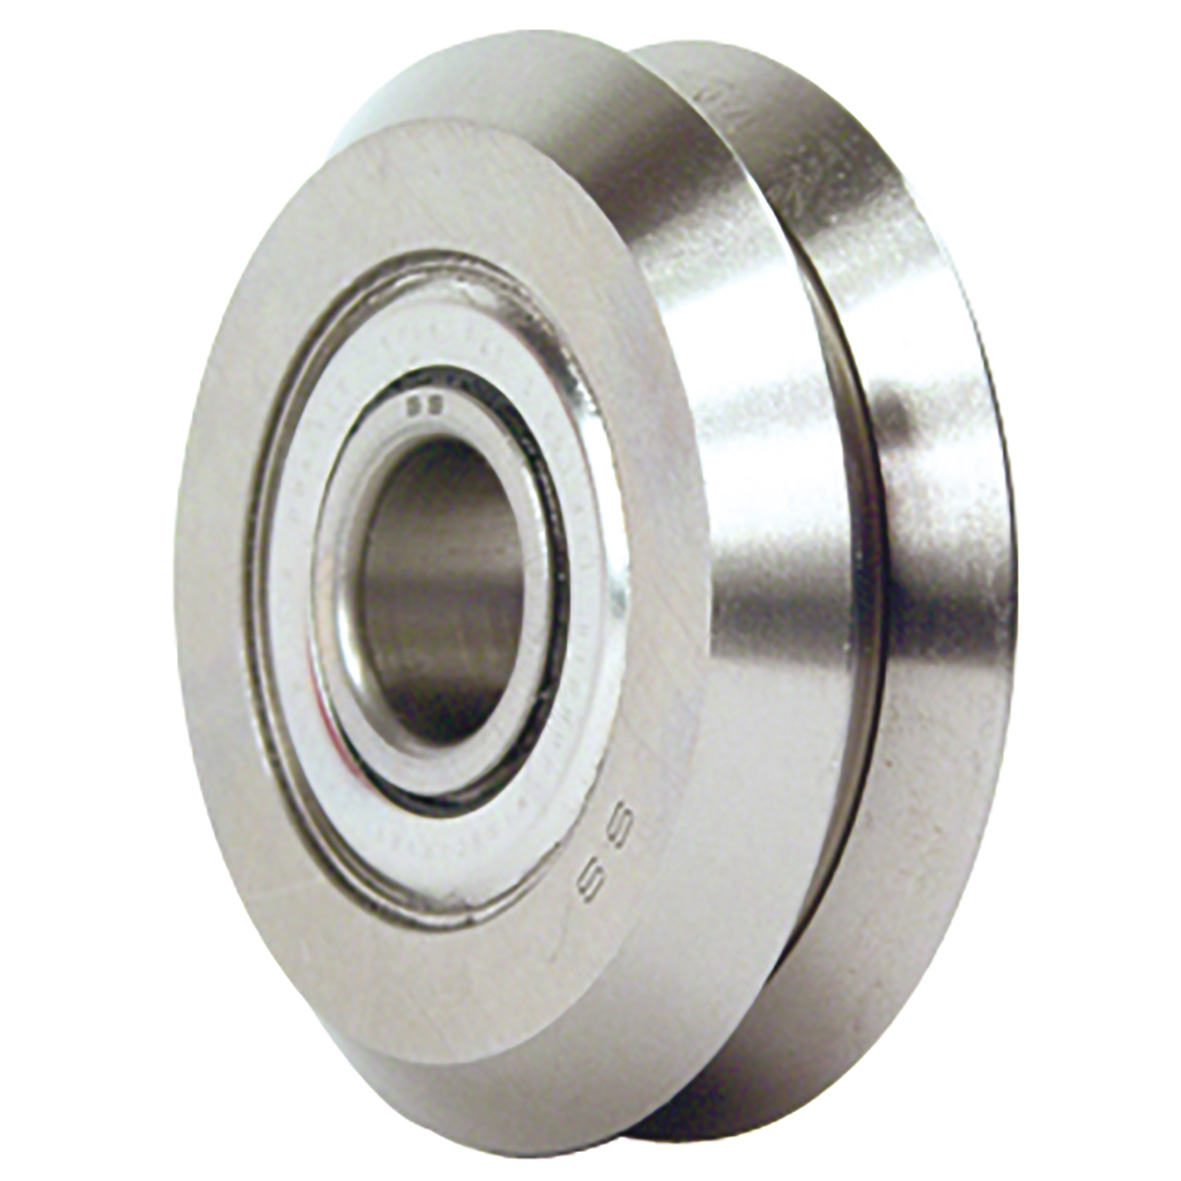 Half-rail guide - Wheel - Stainless steel, rubber joints - 